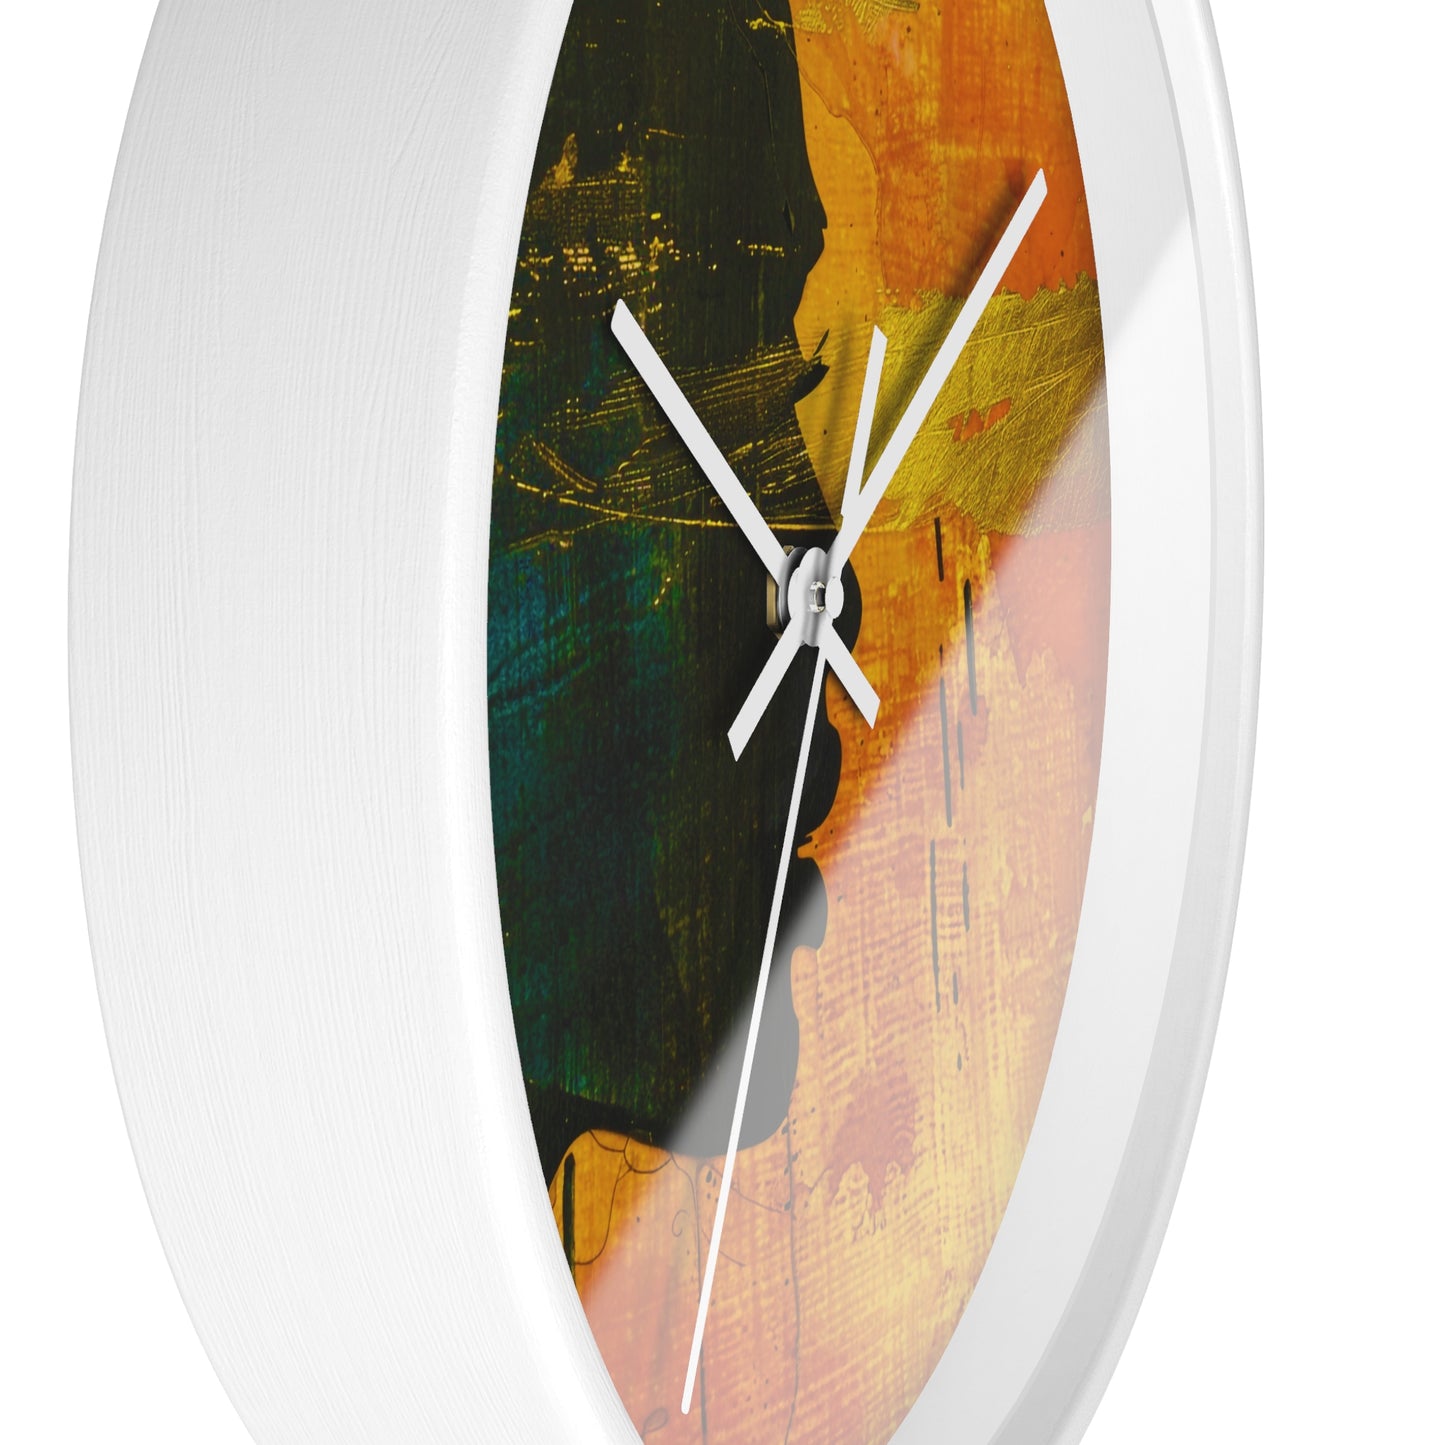 Golden Afrocentric Silhouette Wall Clock